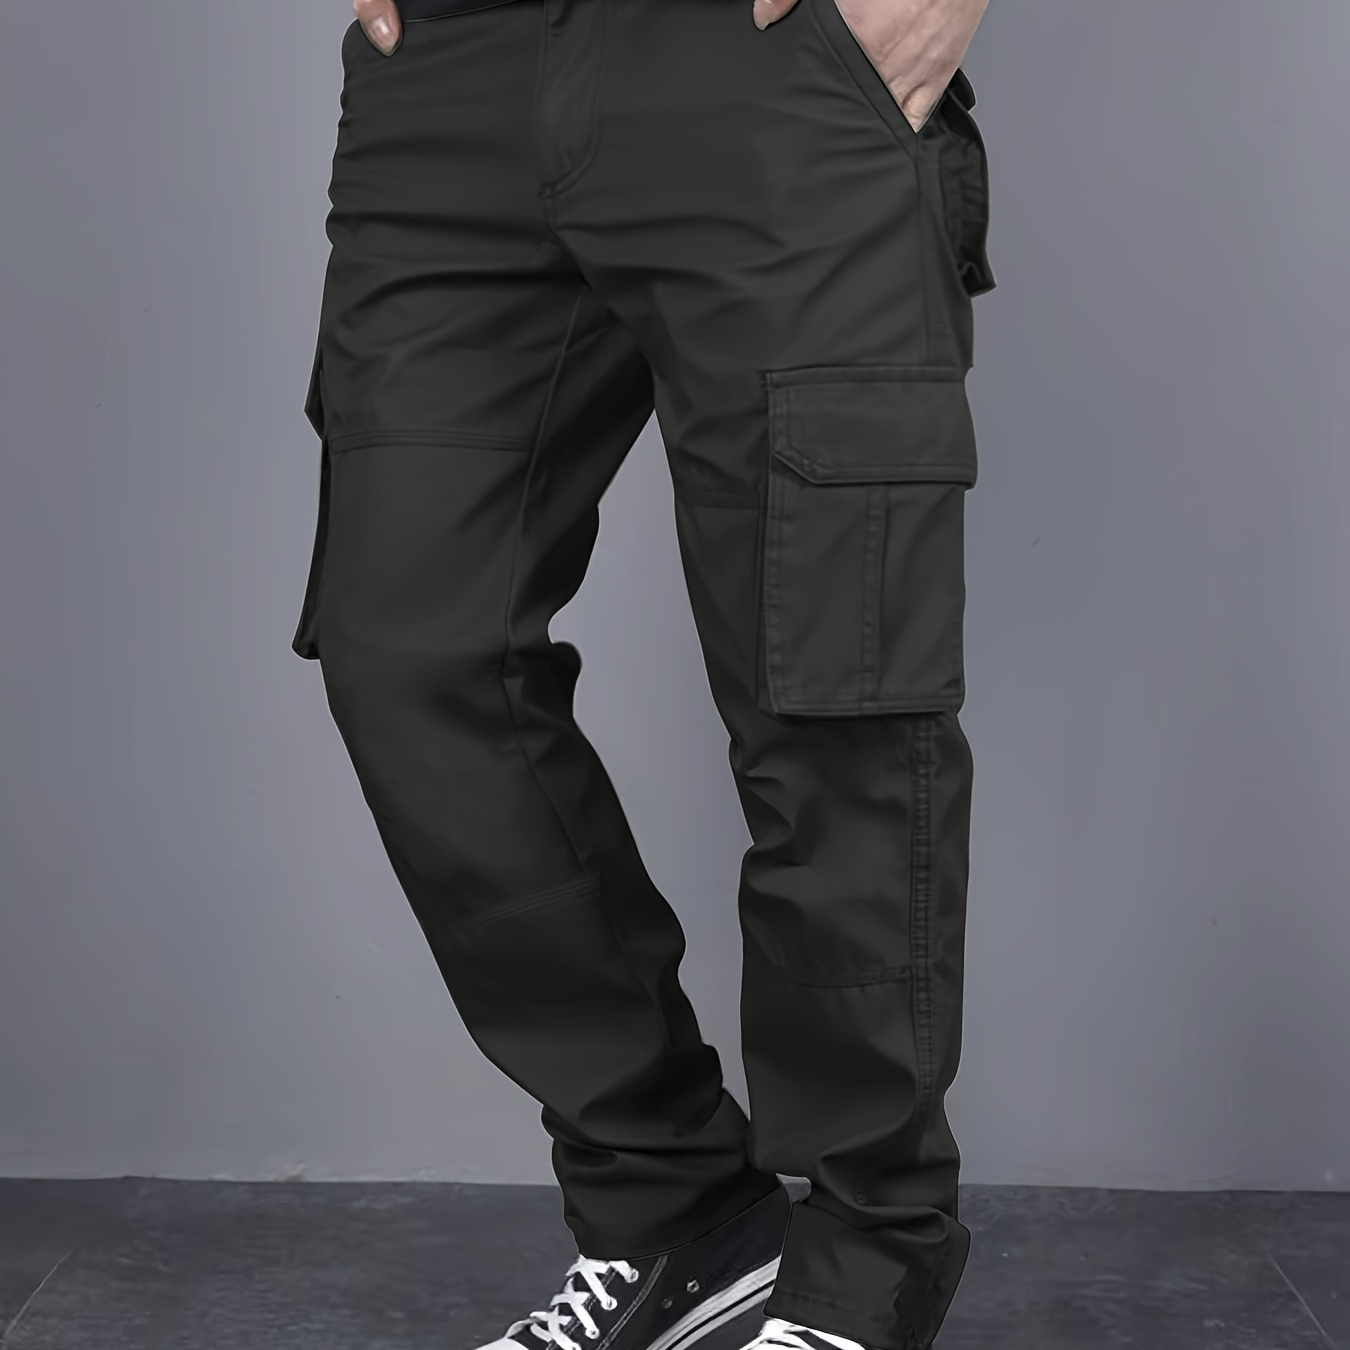 

Men's Loose Solid Cargo Pants With Multi Pockets, Casual Drawstring Trousers For Outdoor